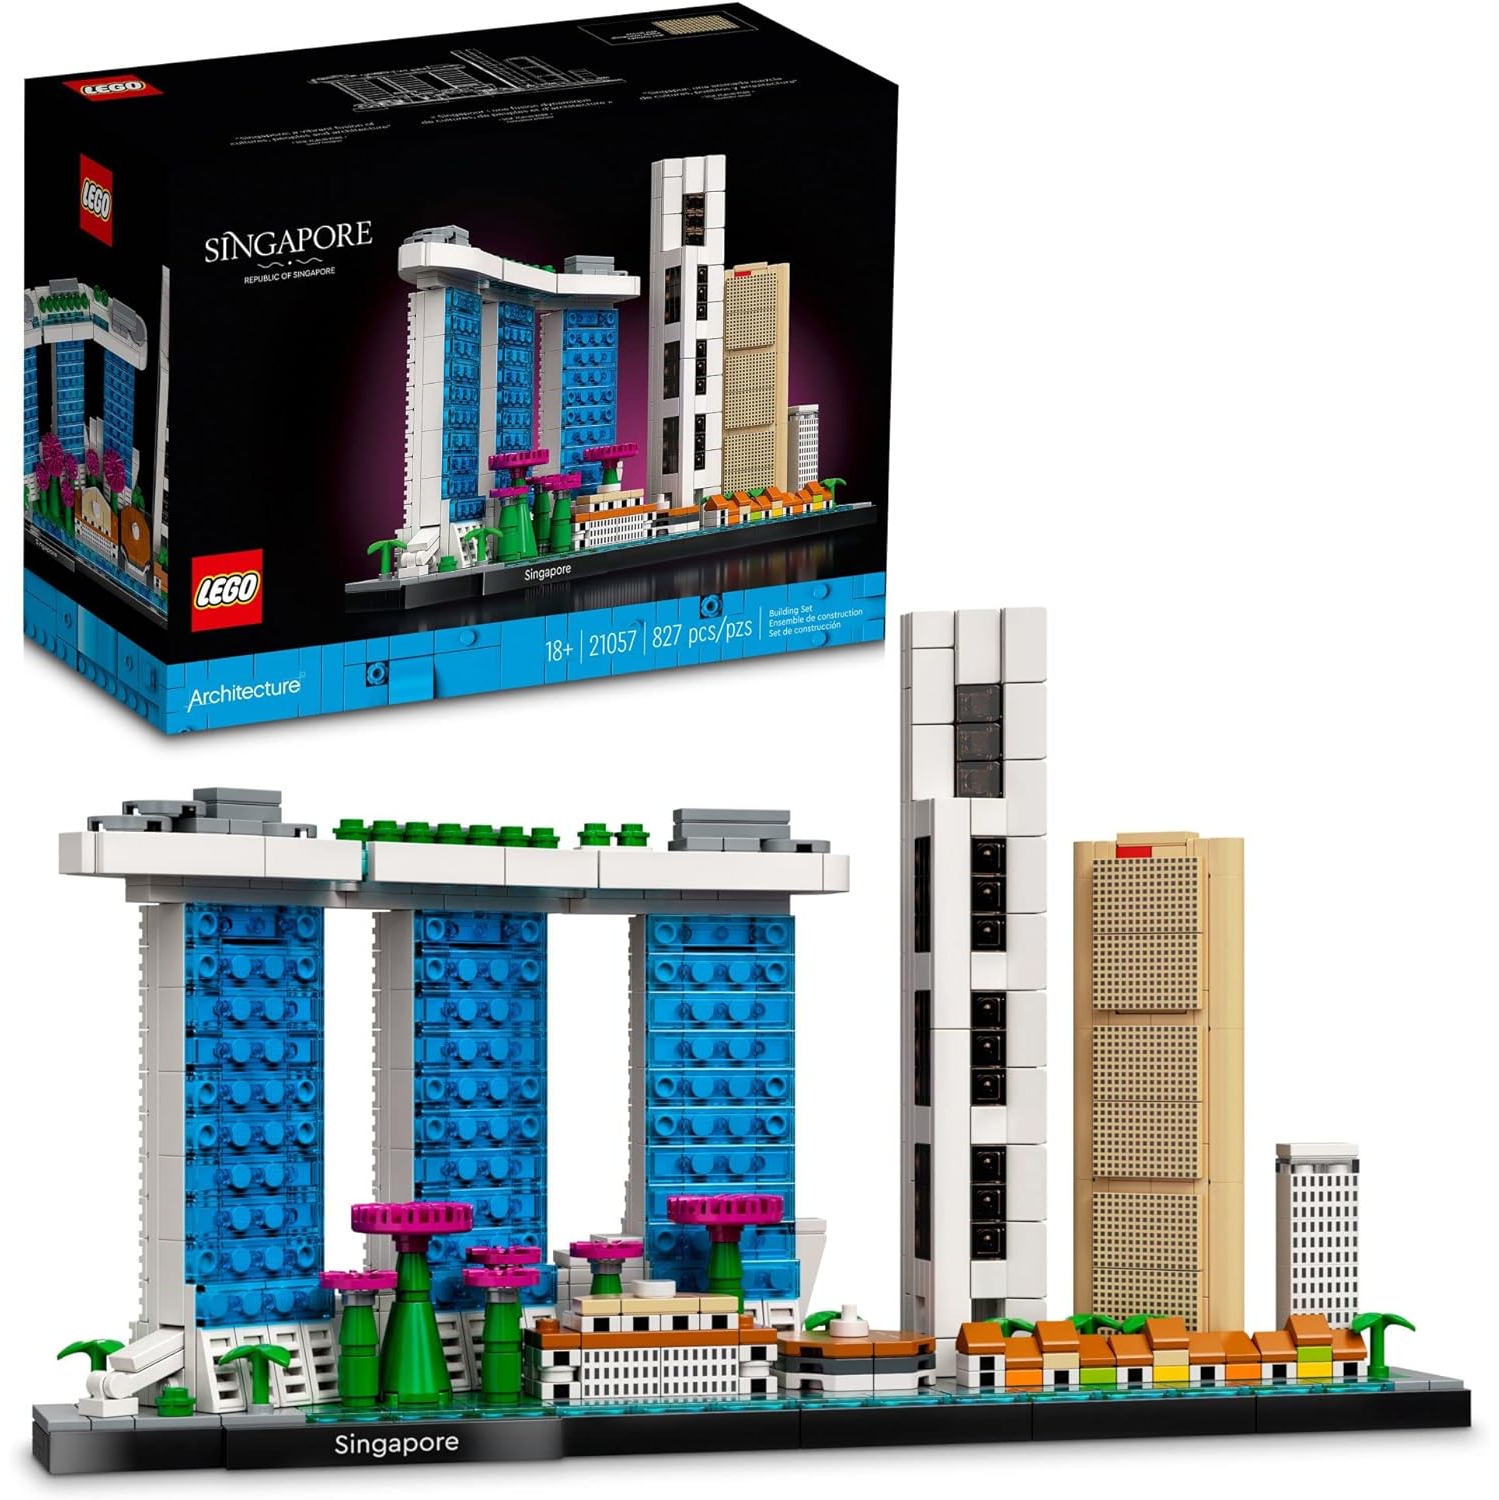 Lego Architecture Singapore 21057 Building Set - Skyline Collection, Architecture Construction Model for Home and Office Décor, Gift Idea for Adults